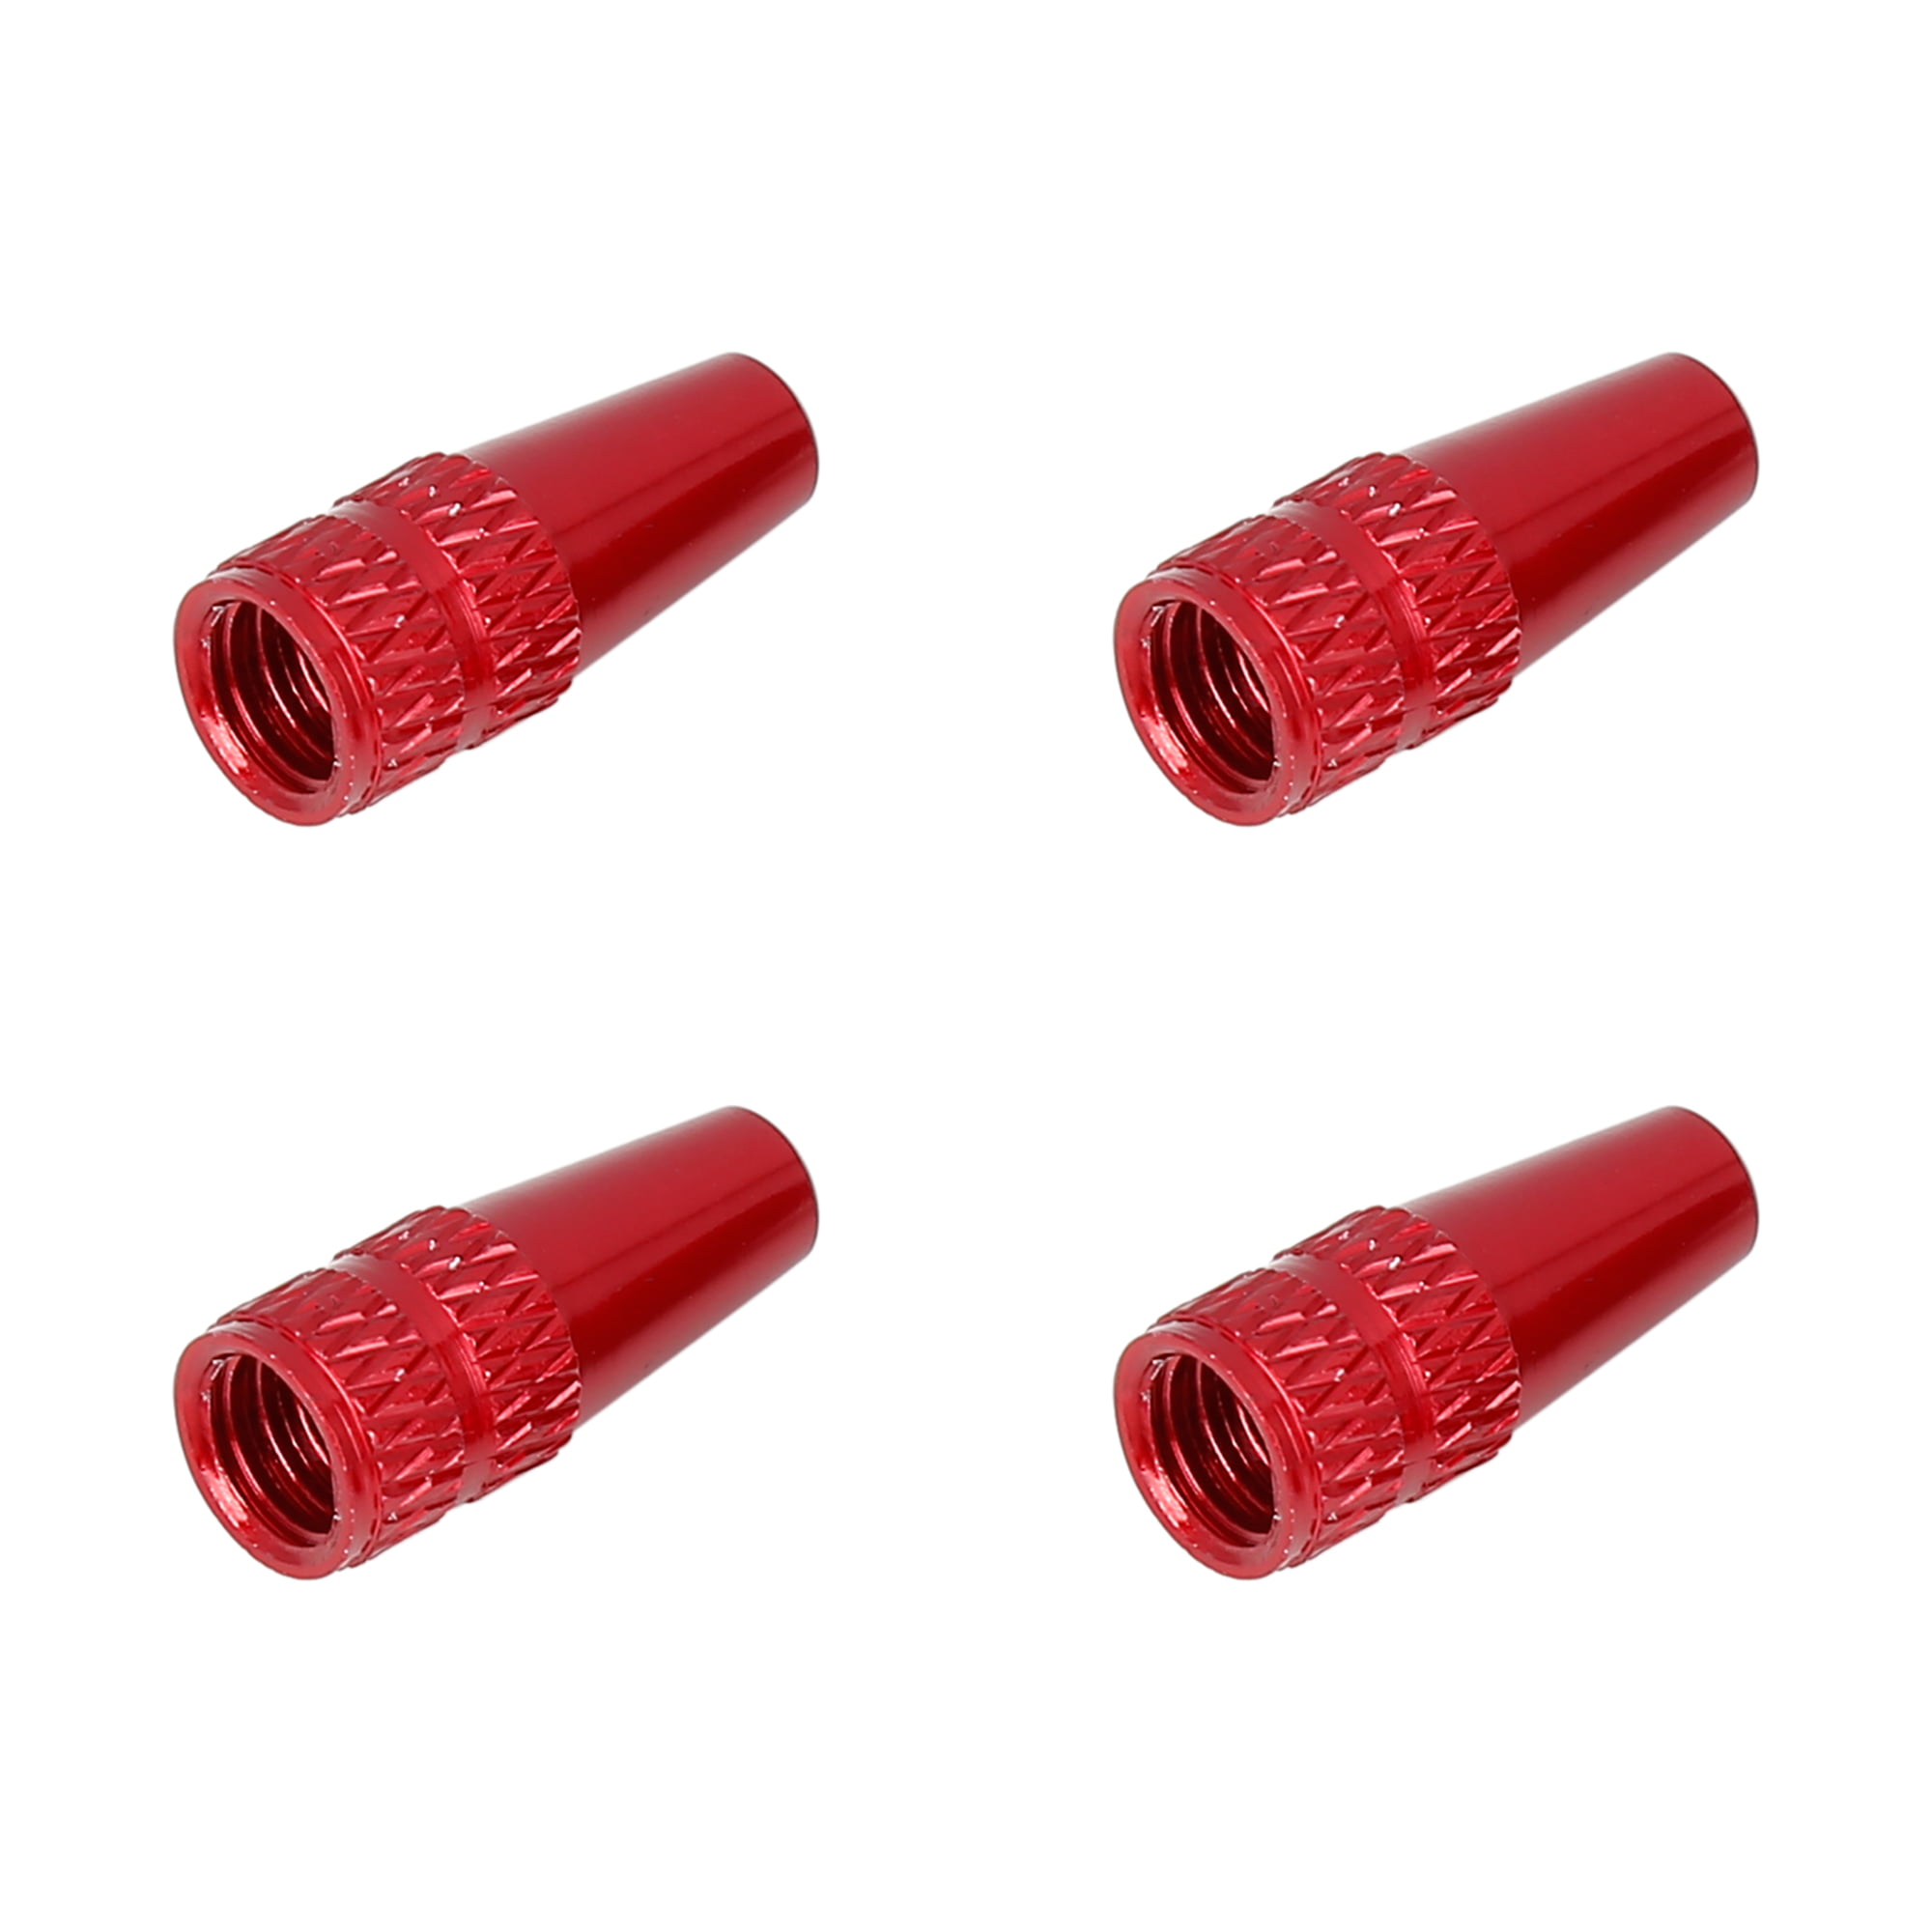 Bike Cycle Bicycle Presta Alloy High Pressure Valve Caps Dust Cover RED X 2 